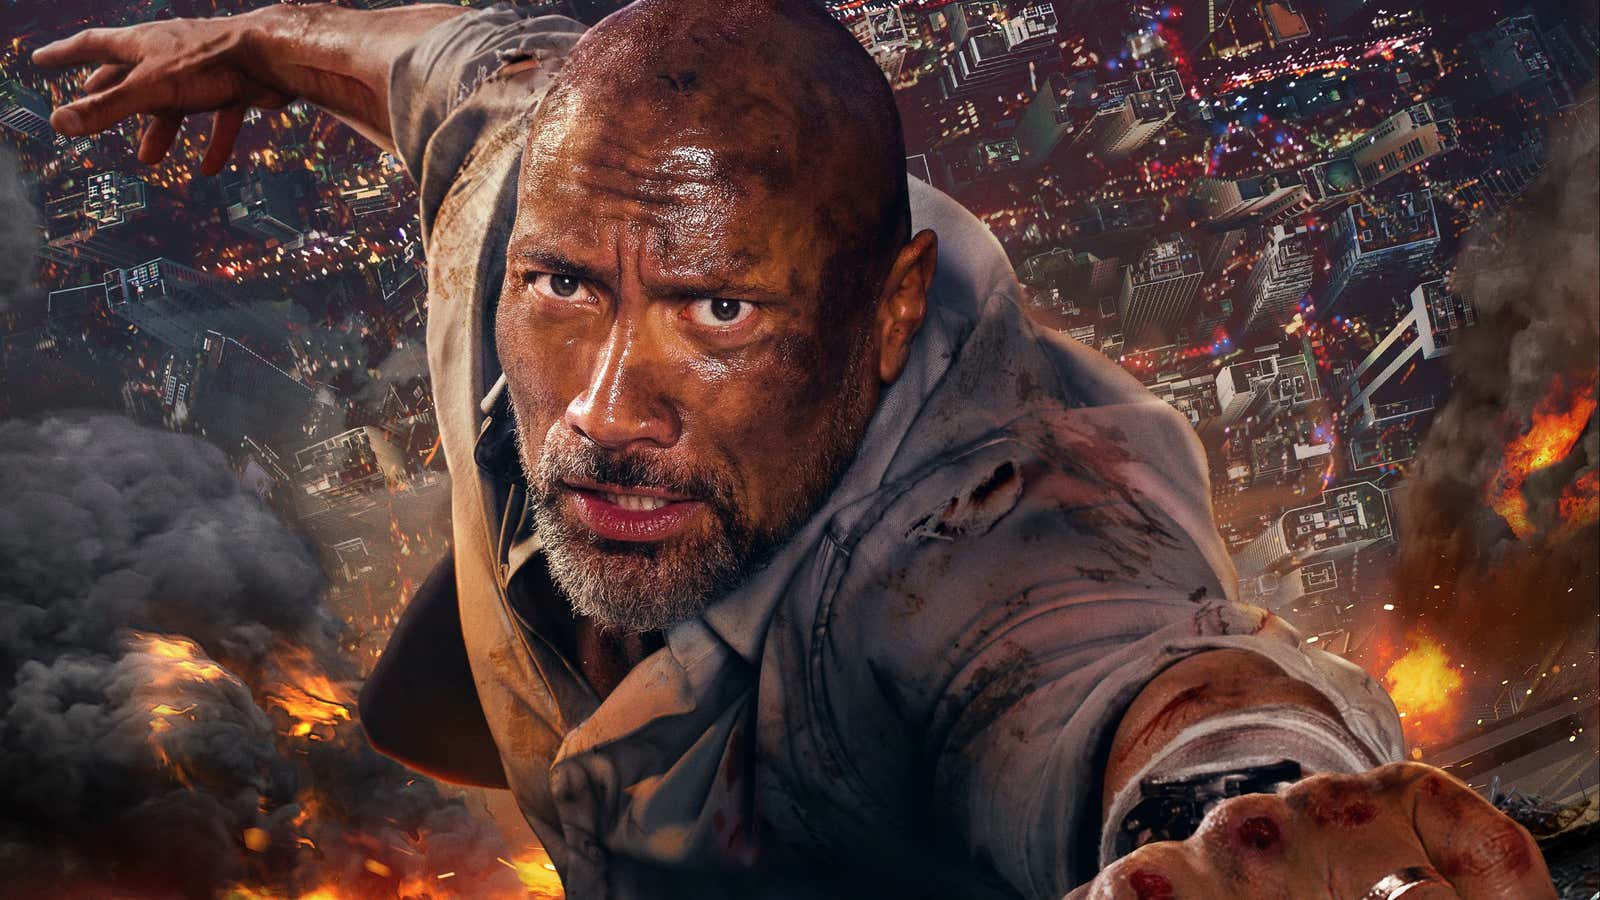 “The Rock” is basically his own movie genre now